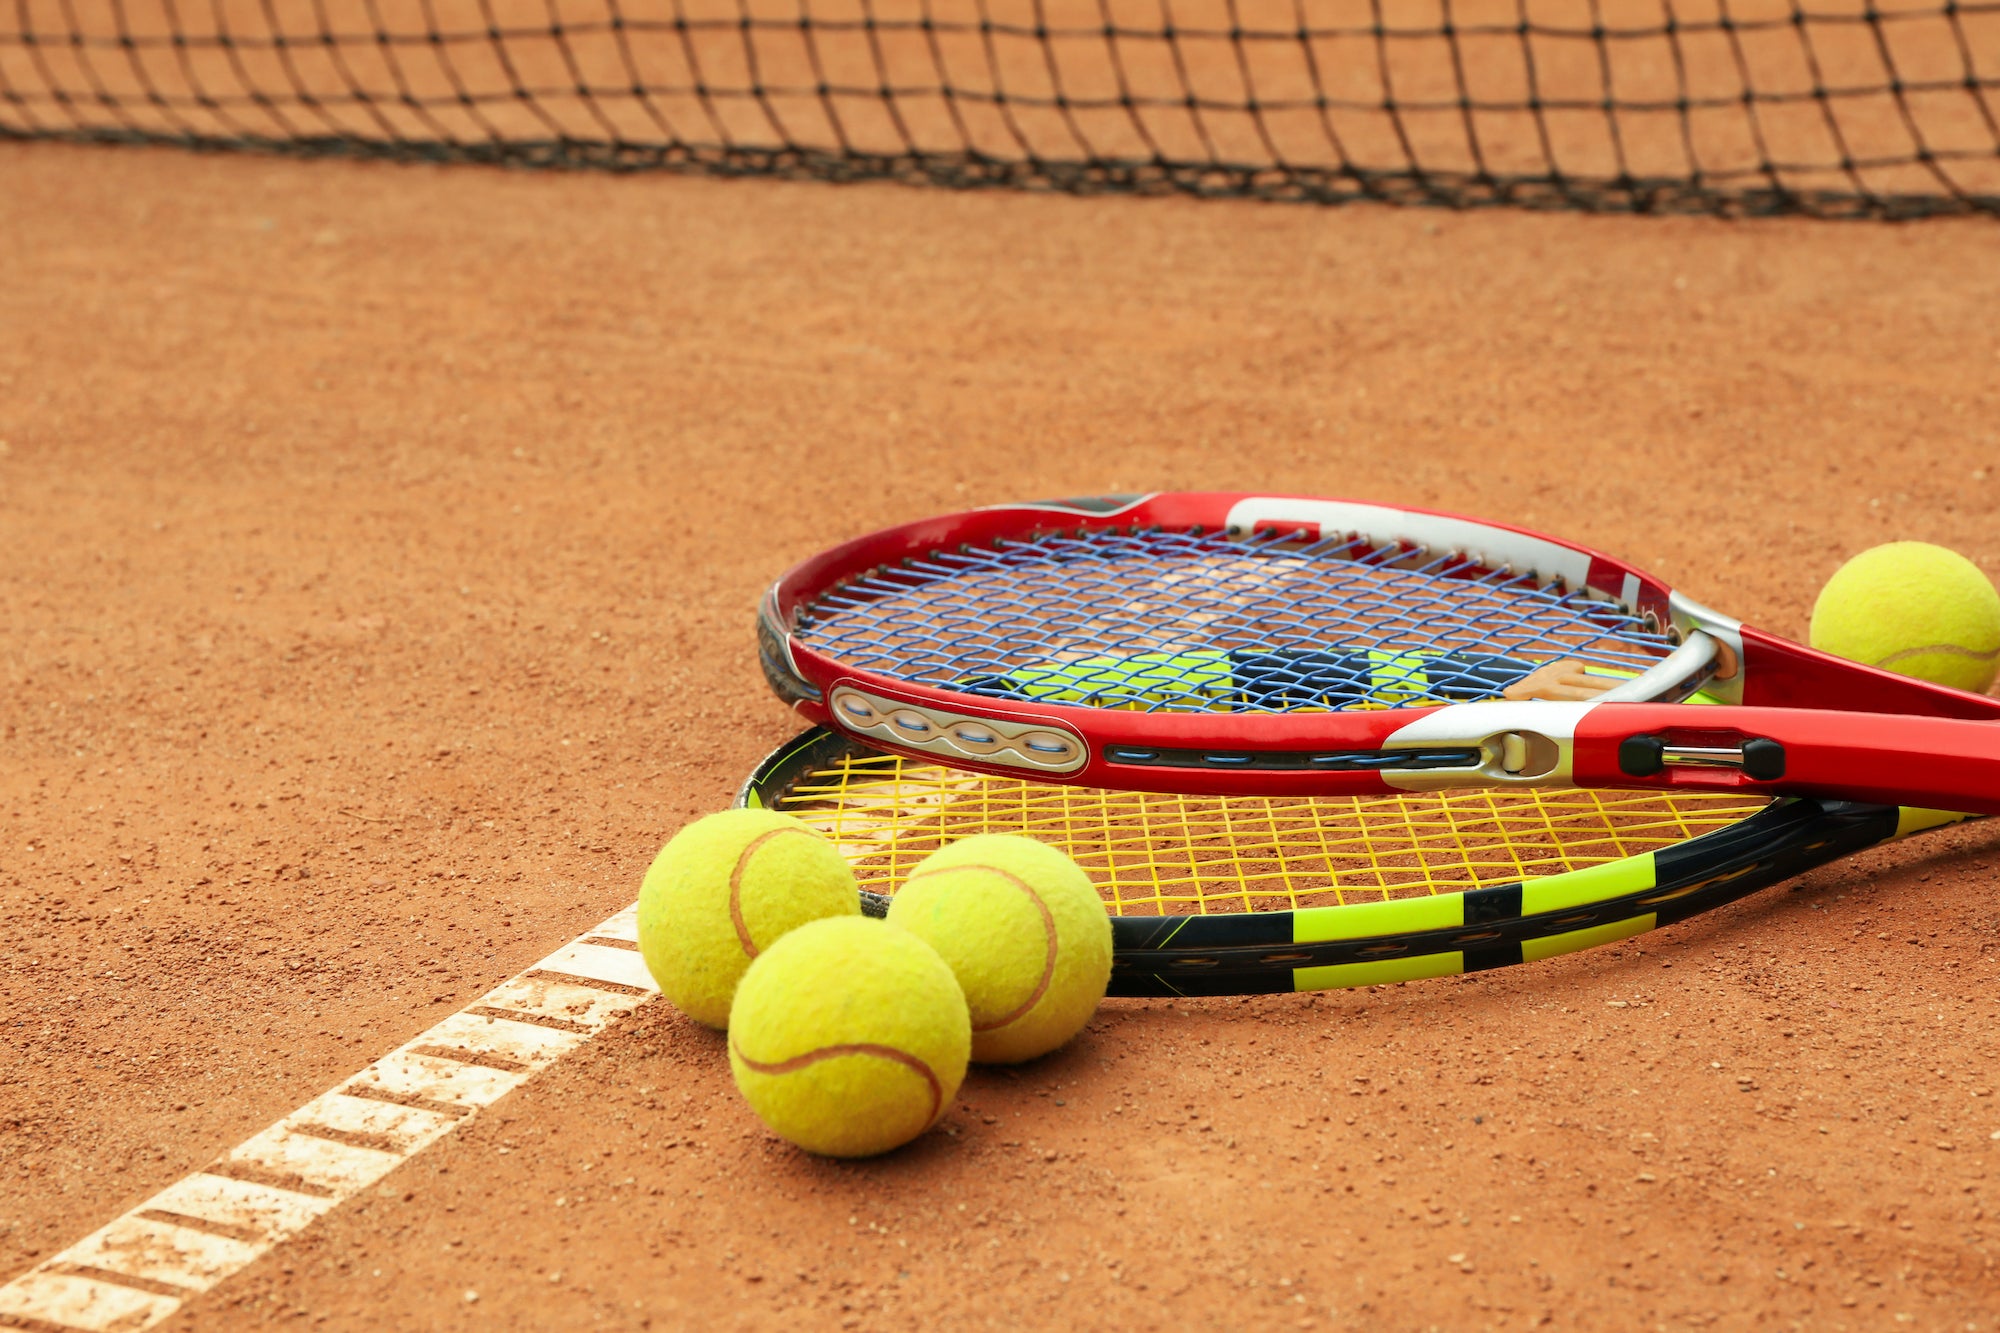 7 Must-Have Features to Look for in a Tennis Racquet